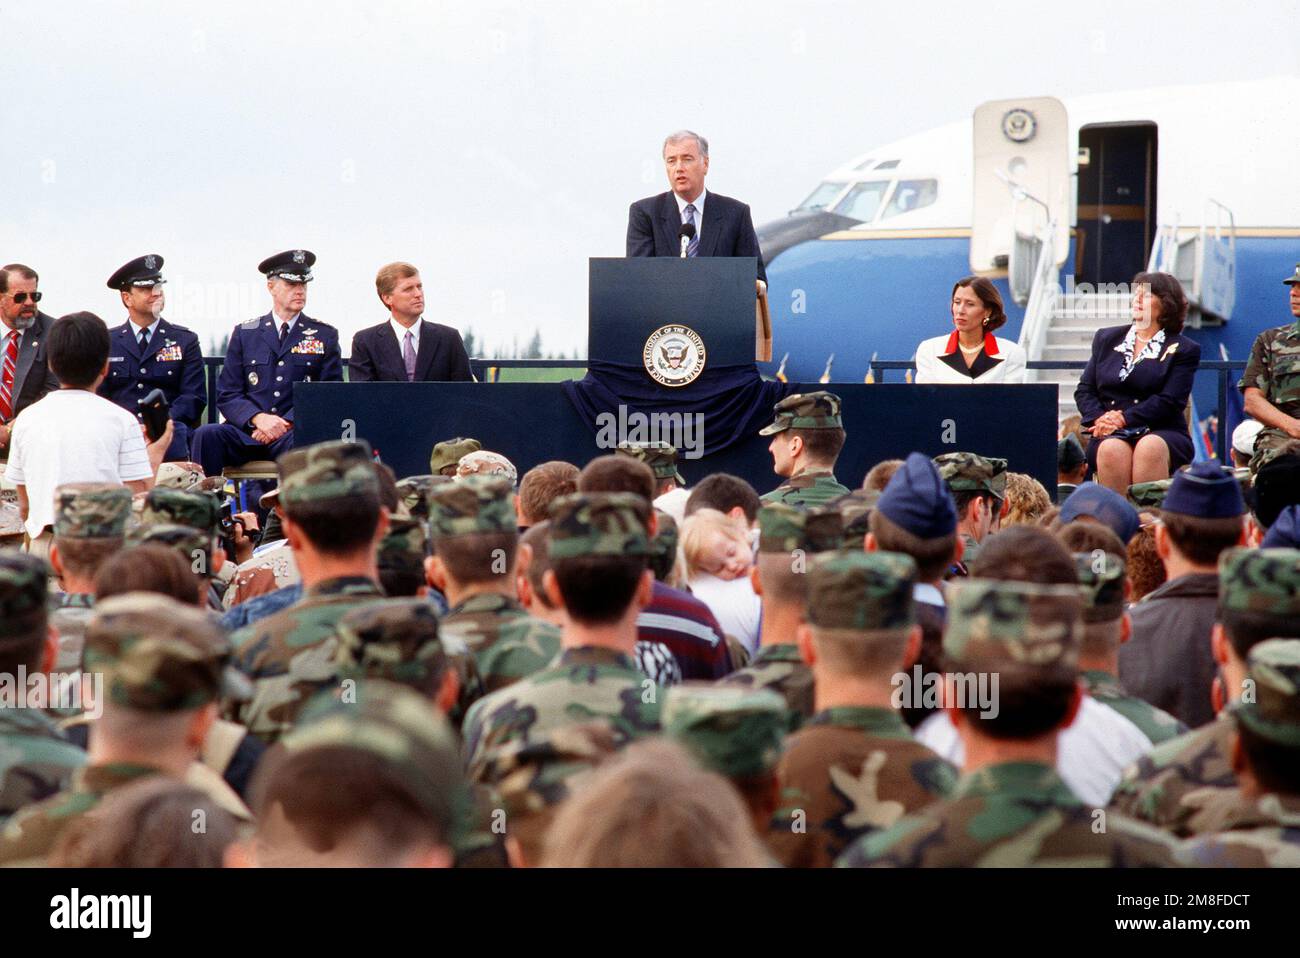 Alaskan Sen. Frank H. Murkowski speaks to troops assembled at Eielson for a visit by Vice President J. Danforth Quayle, seated at left. Seated beside Quayle is LT. GEN. Thomas G. McInerney, commander, 11th Air Force, while Marilyn Quayle and Mrs. Murkowski are seated at right. The vice president is visiting Eielson to express his appreciation to airmen who served in the Persian Gulf area during Operation Desert Storm. Subject Operation/Series: DESERT STORM Base: Eielson Air Force Base State: Alaska(AK) Country: United States Of America(USA) Stock Photo